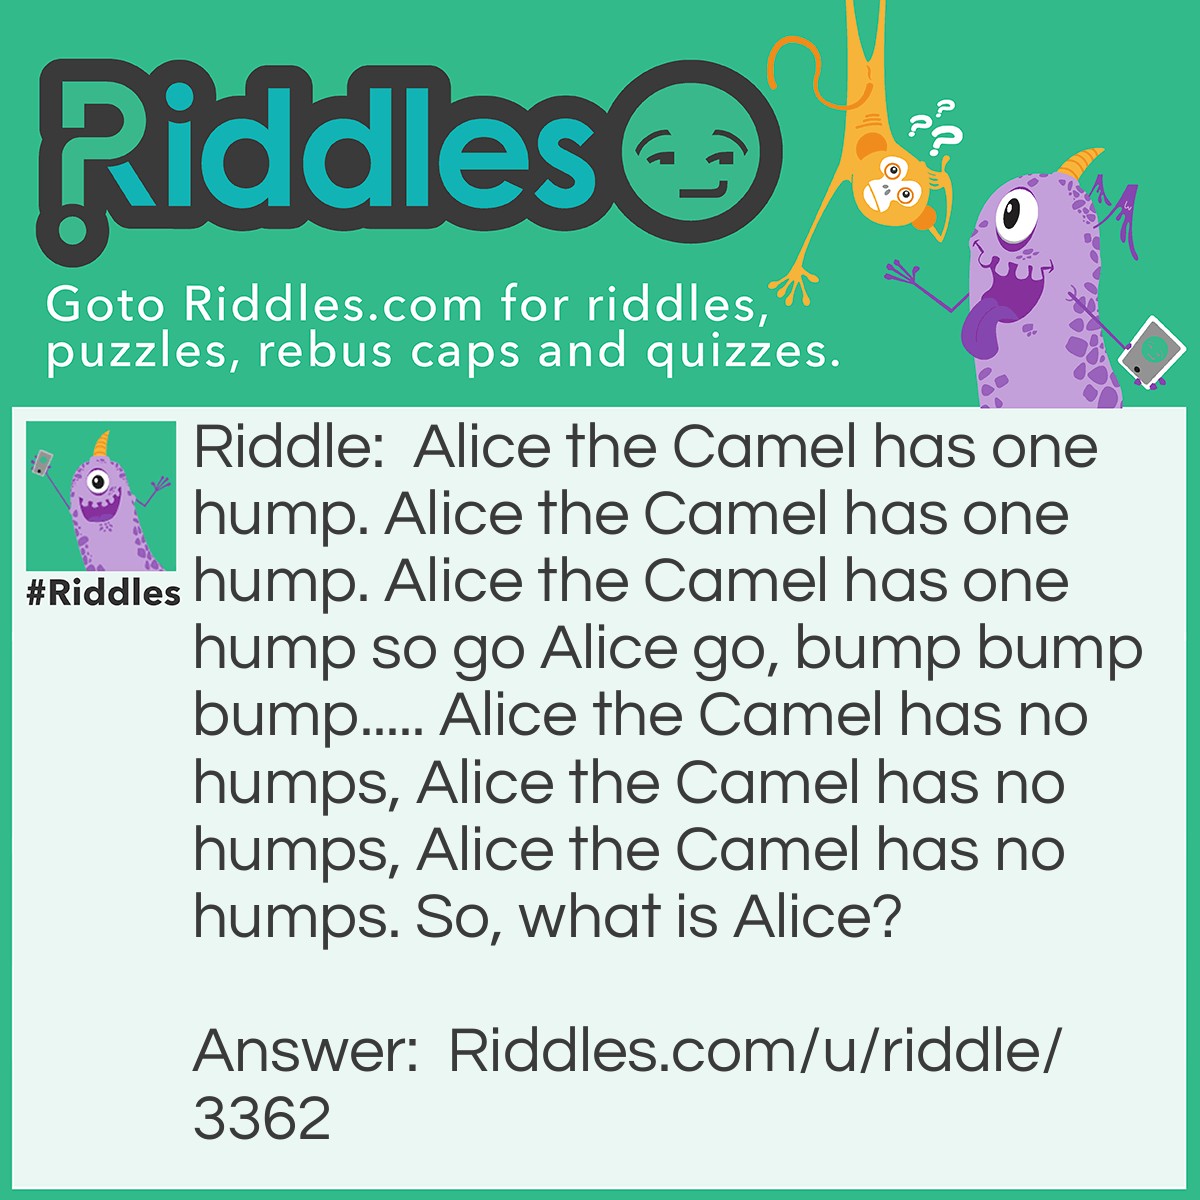 Riddle: Alice the Camel has one hump. Alice the Camel has one hump. Alice the Camel has one hump so go Alice go, bump bump bump..... Alice the Camel has no humps, Alice the Camel has no humps, Alice the Camel has no humps. So, what is Alice? Answer: A horse